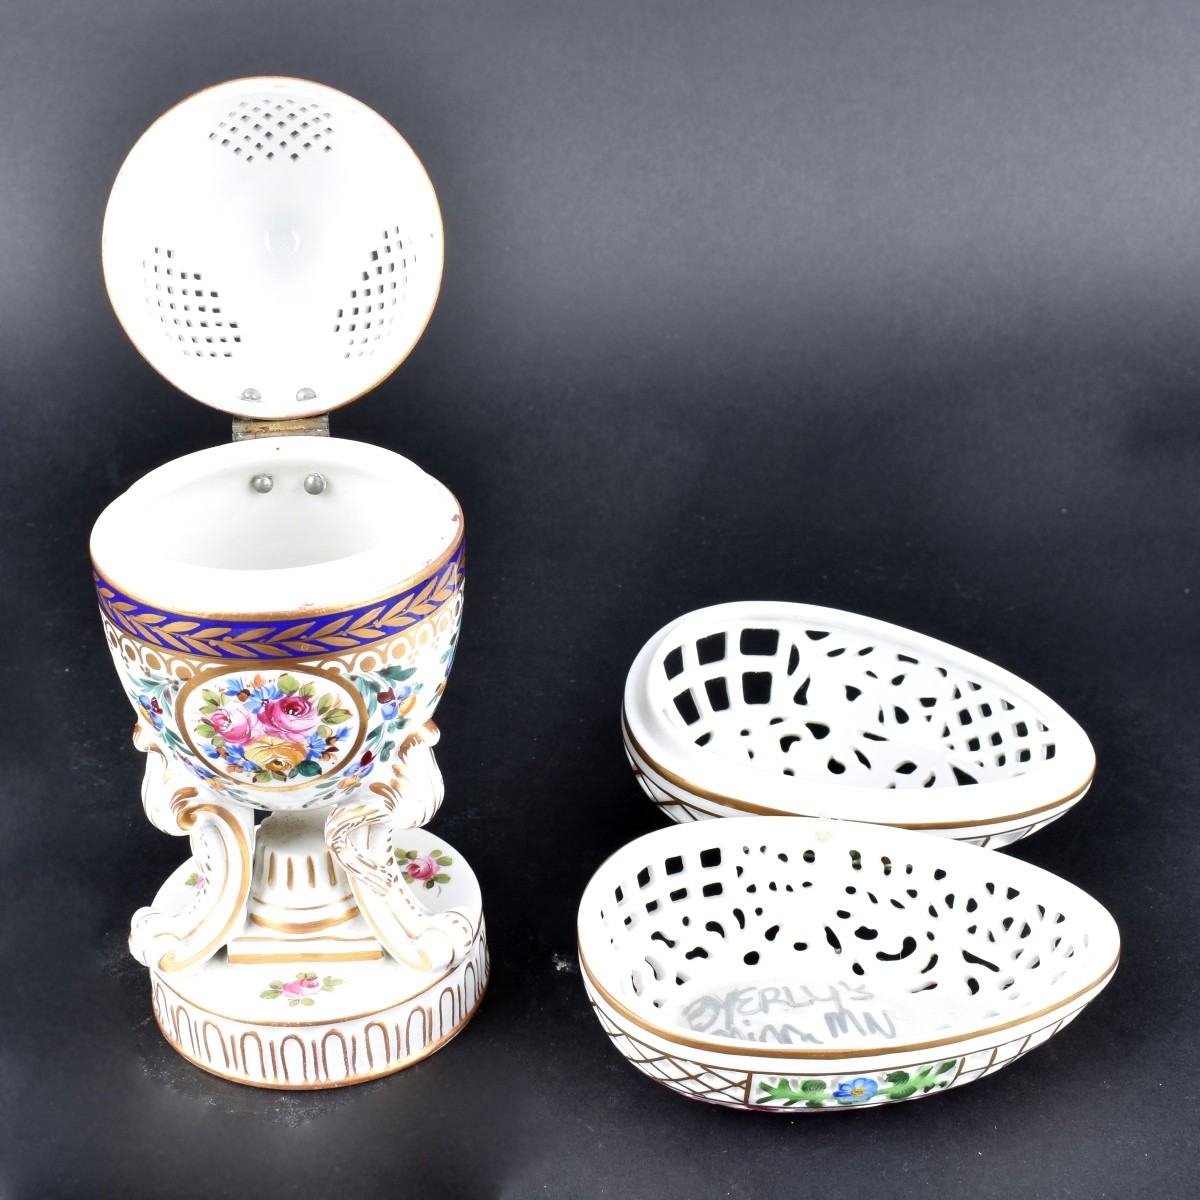 Royal Vienna and Herend Porcelain Tableware